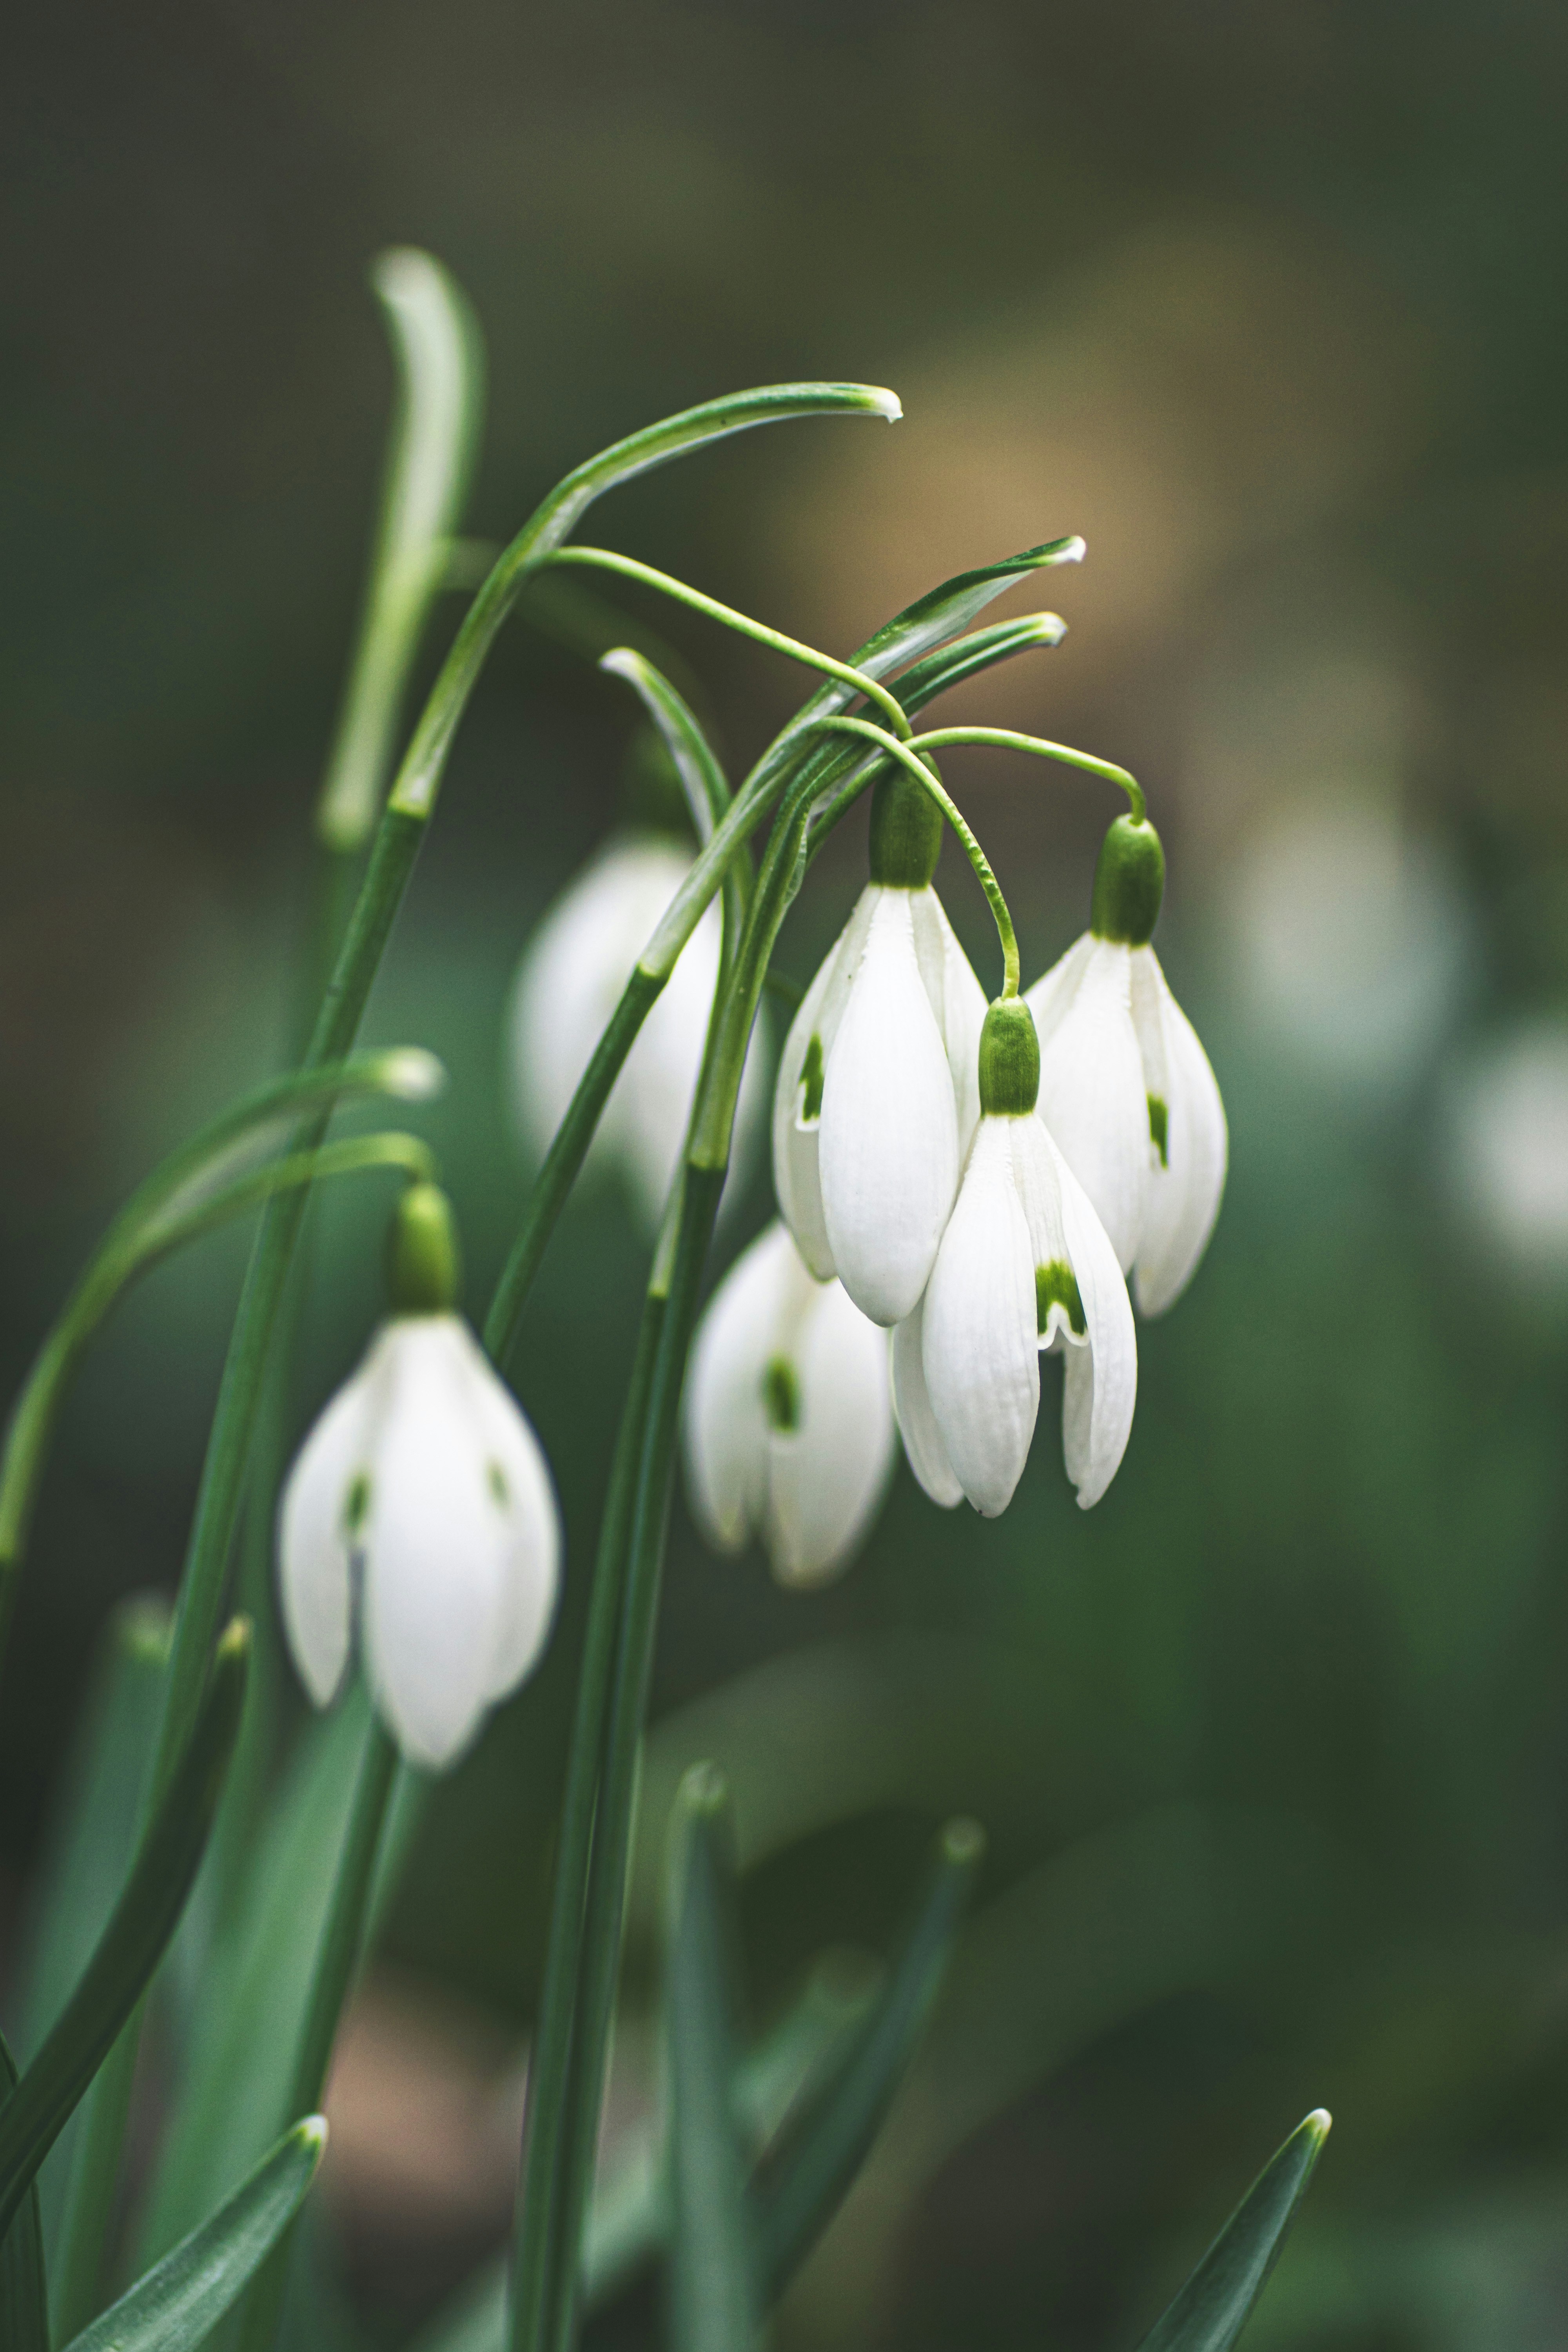 snowdrop flower pictures  download free images on unsplash